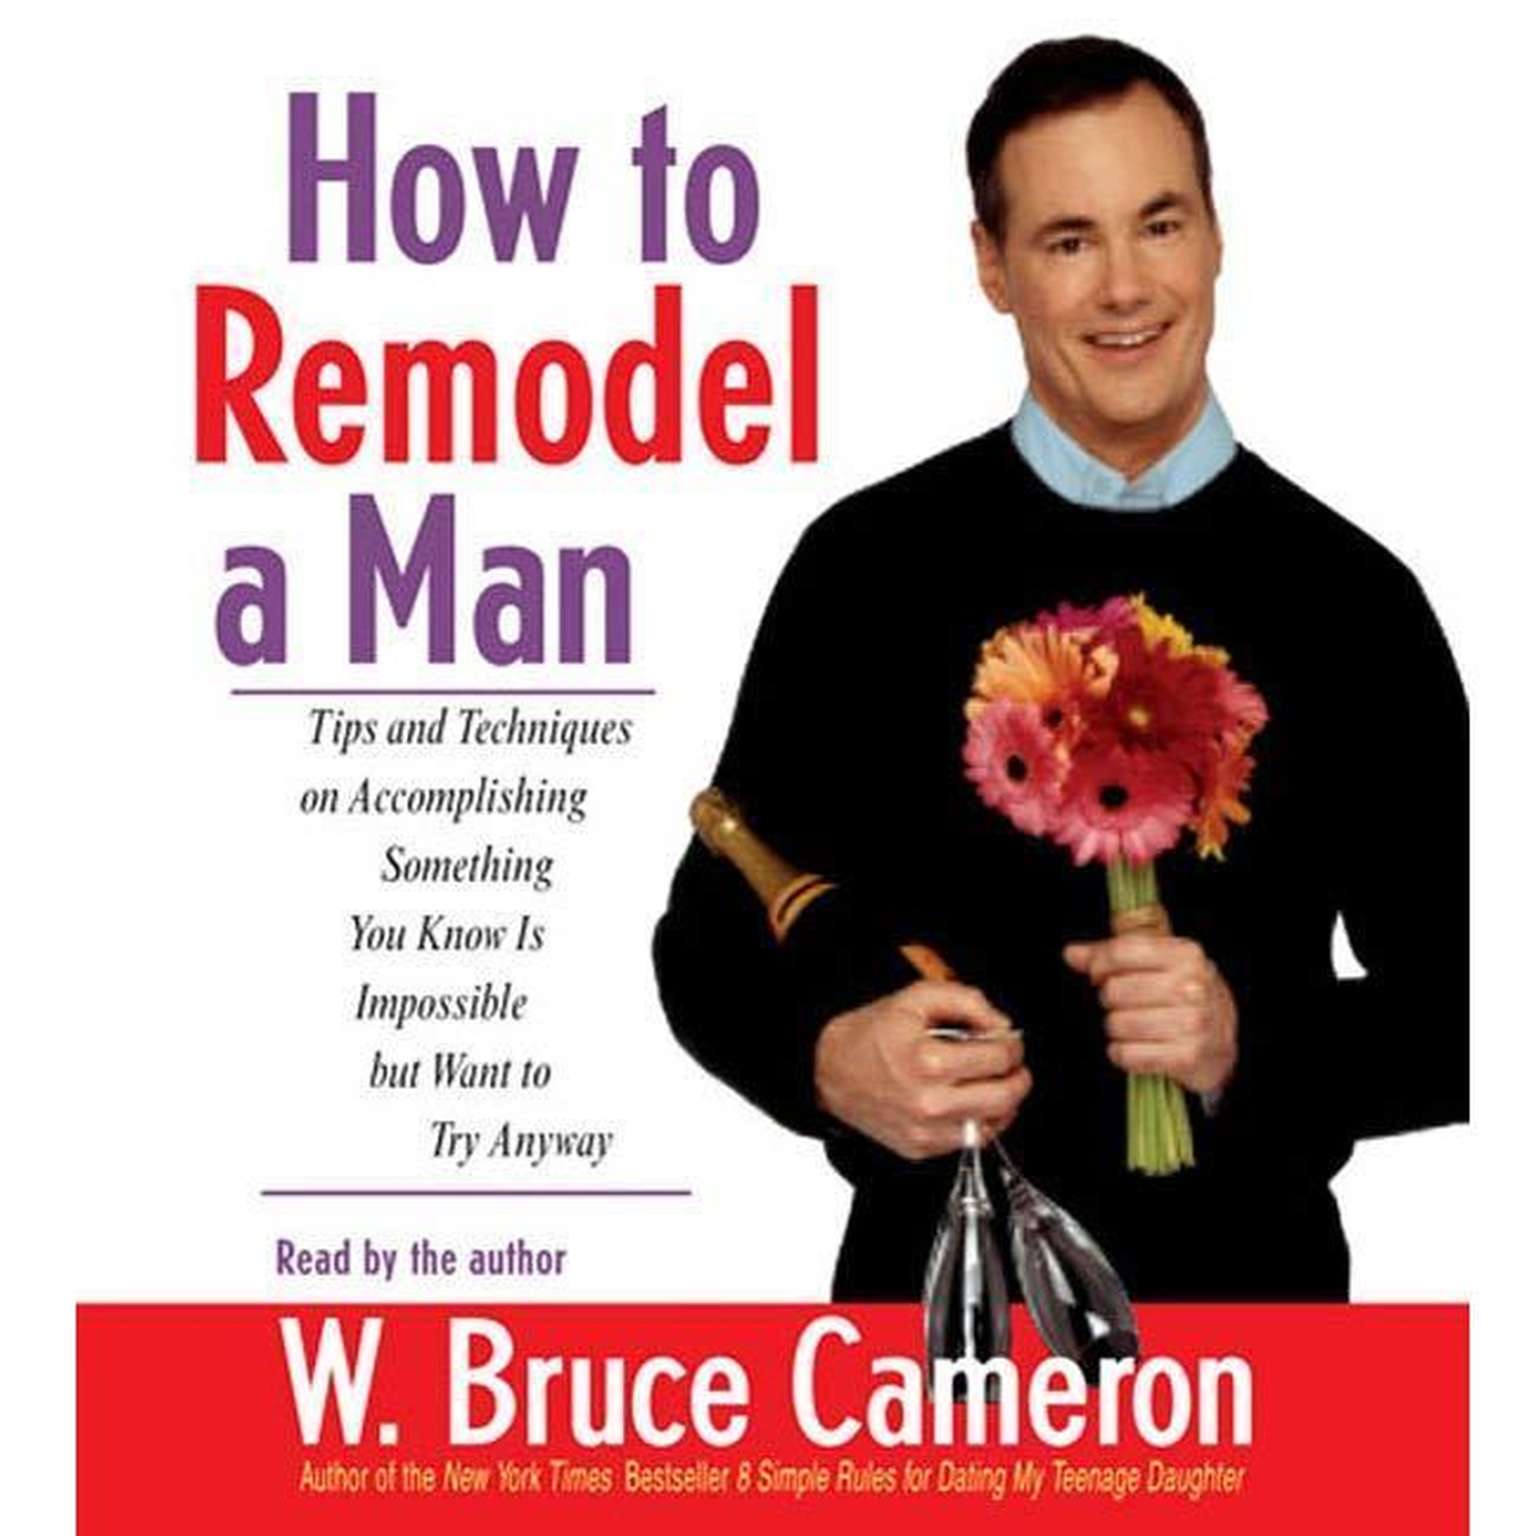 How to Remodel a Man (Abridged): Tips and Techniques on Accomplishing Something You Know Is Impossible but Want to Try Anyway Audiobook, by W. Bruce Cameron